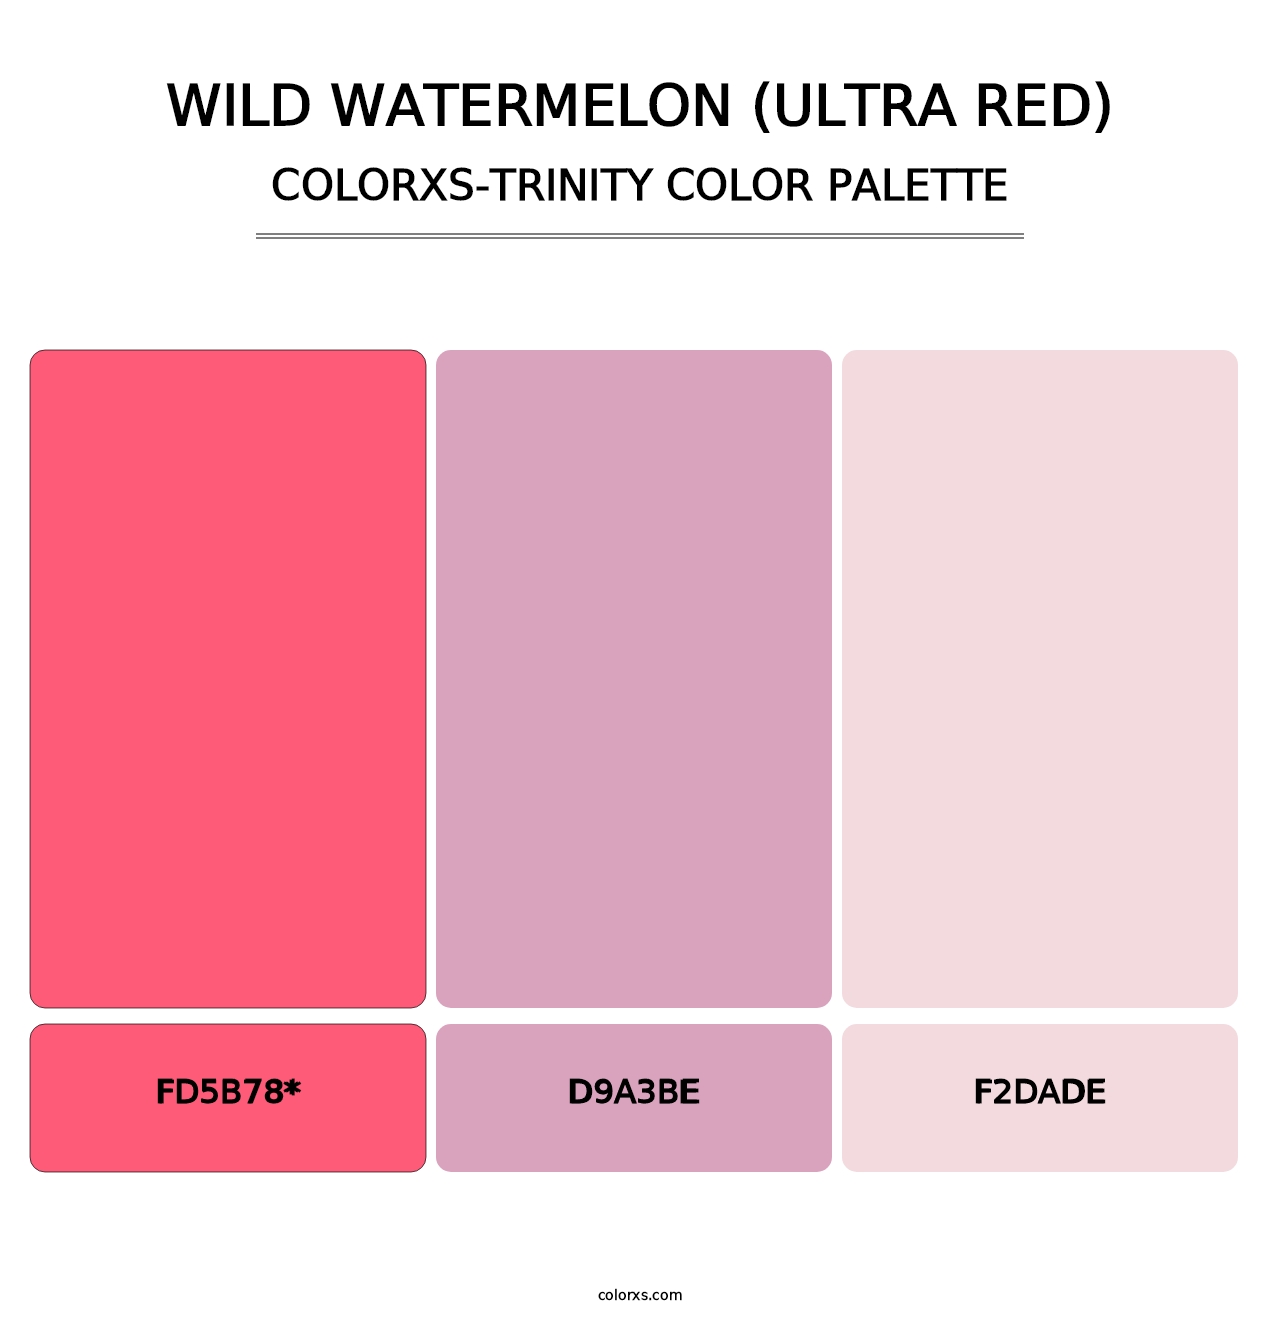 Wild Watermelon (Ultra Red) - Colorxs Trinity Palette